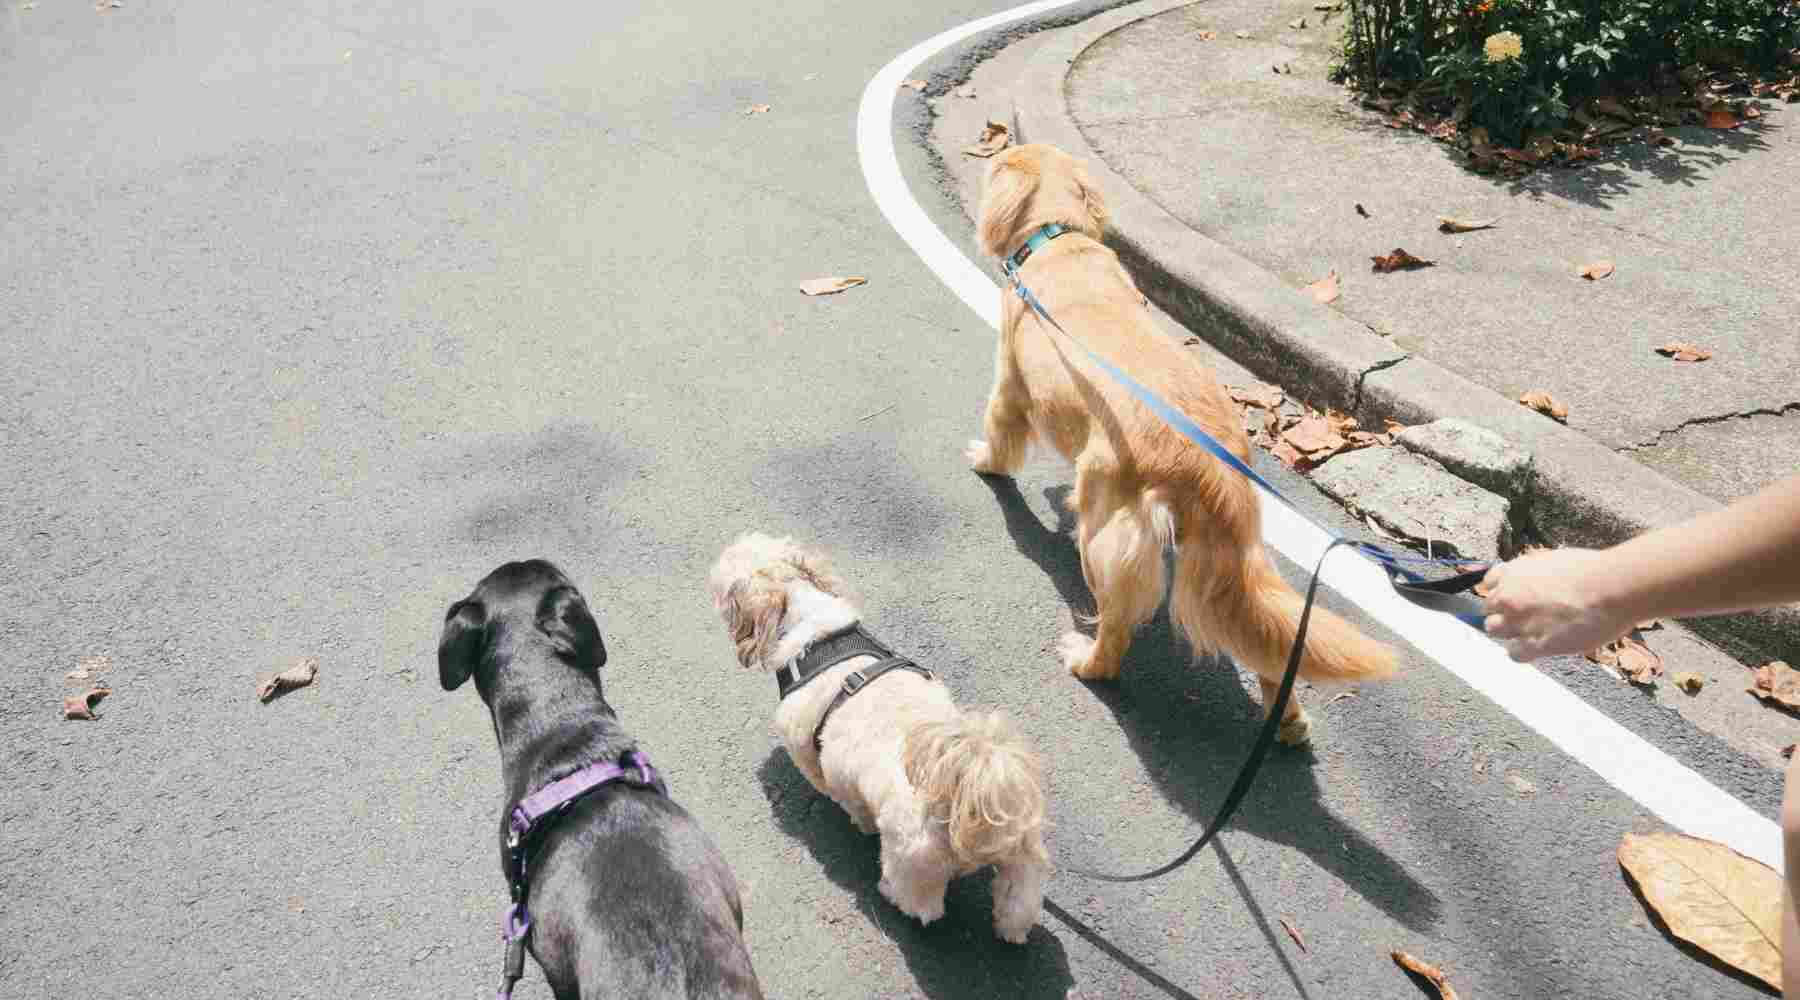 Jobs That Pay $30 an Hour - Dog Walking